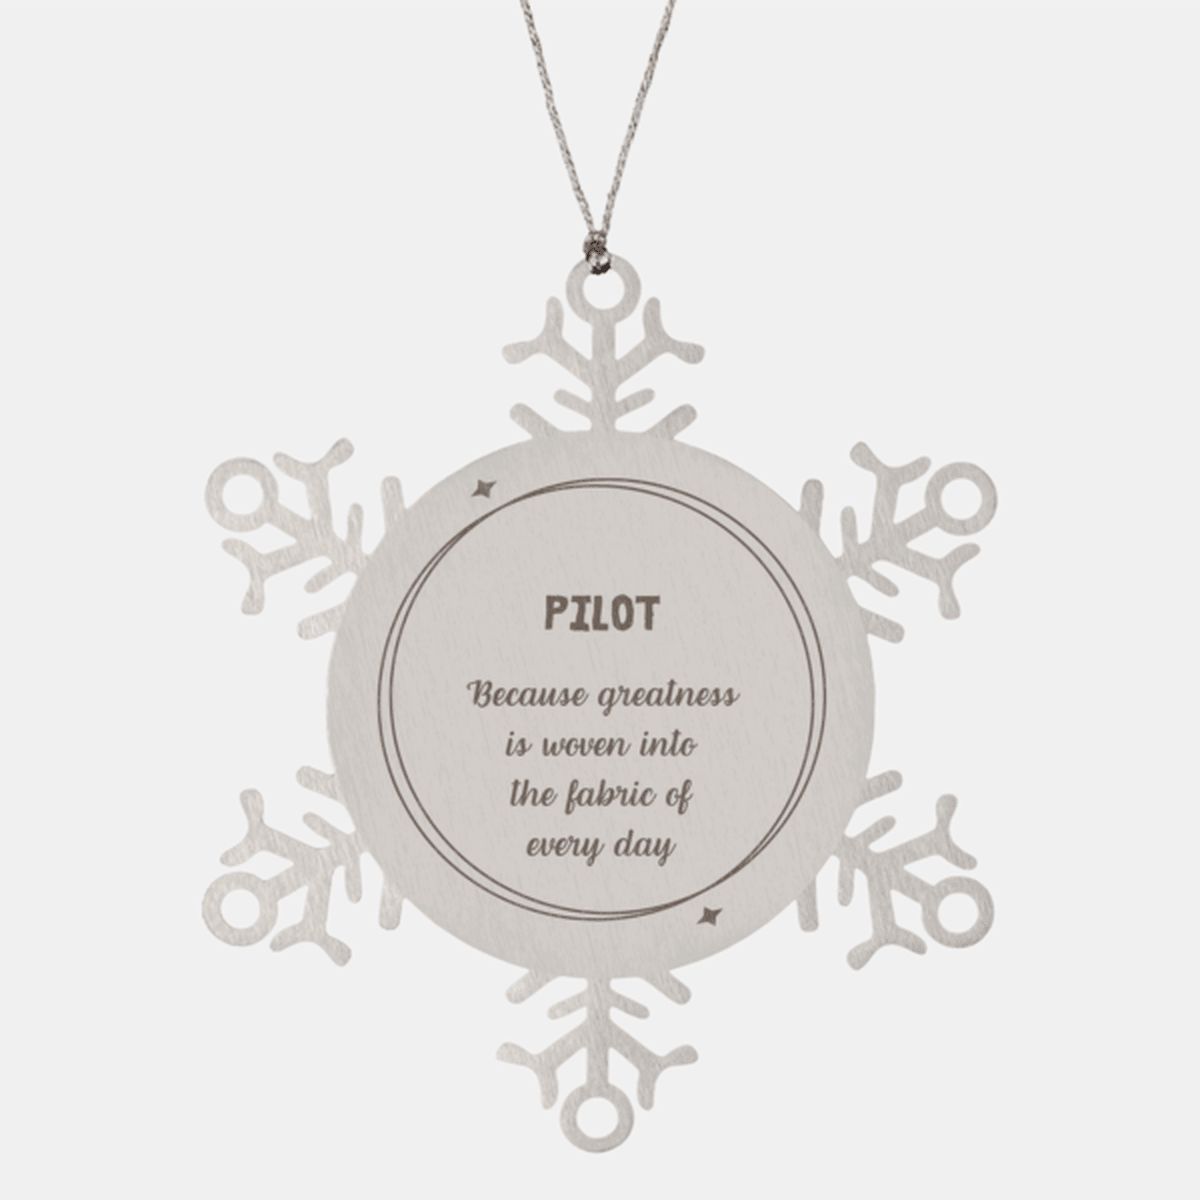 Sarcastic Pilot Snowflake Ornament Gifts, Christmas Holiday Gifts for Pilot Ornament, Pilot: Because greatness is woven into the fabric of every day, Coworkers, Friends - Mallard Moon Gift Shop